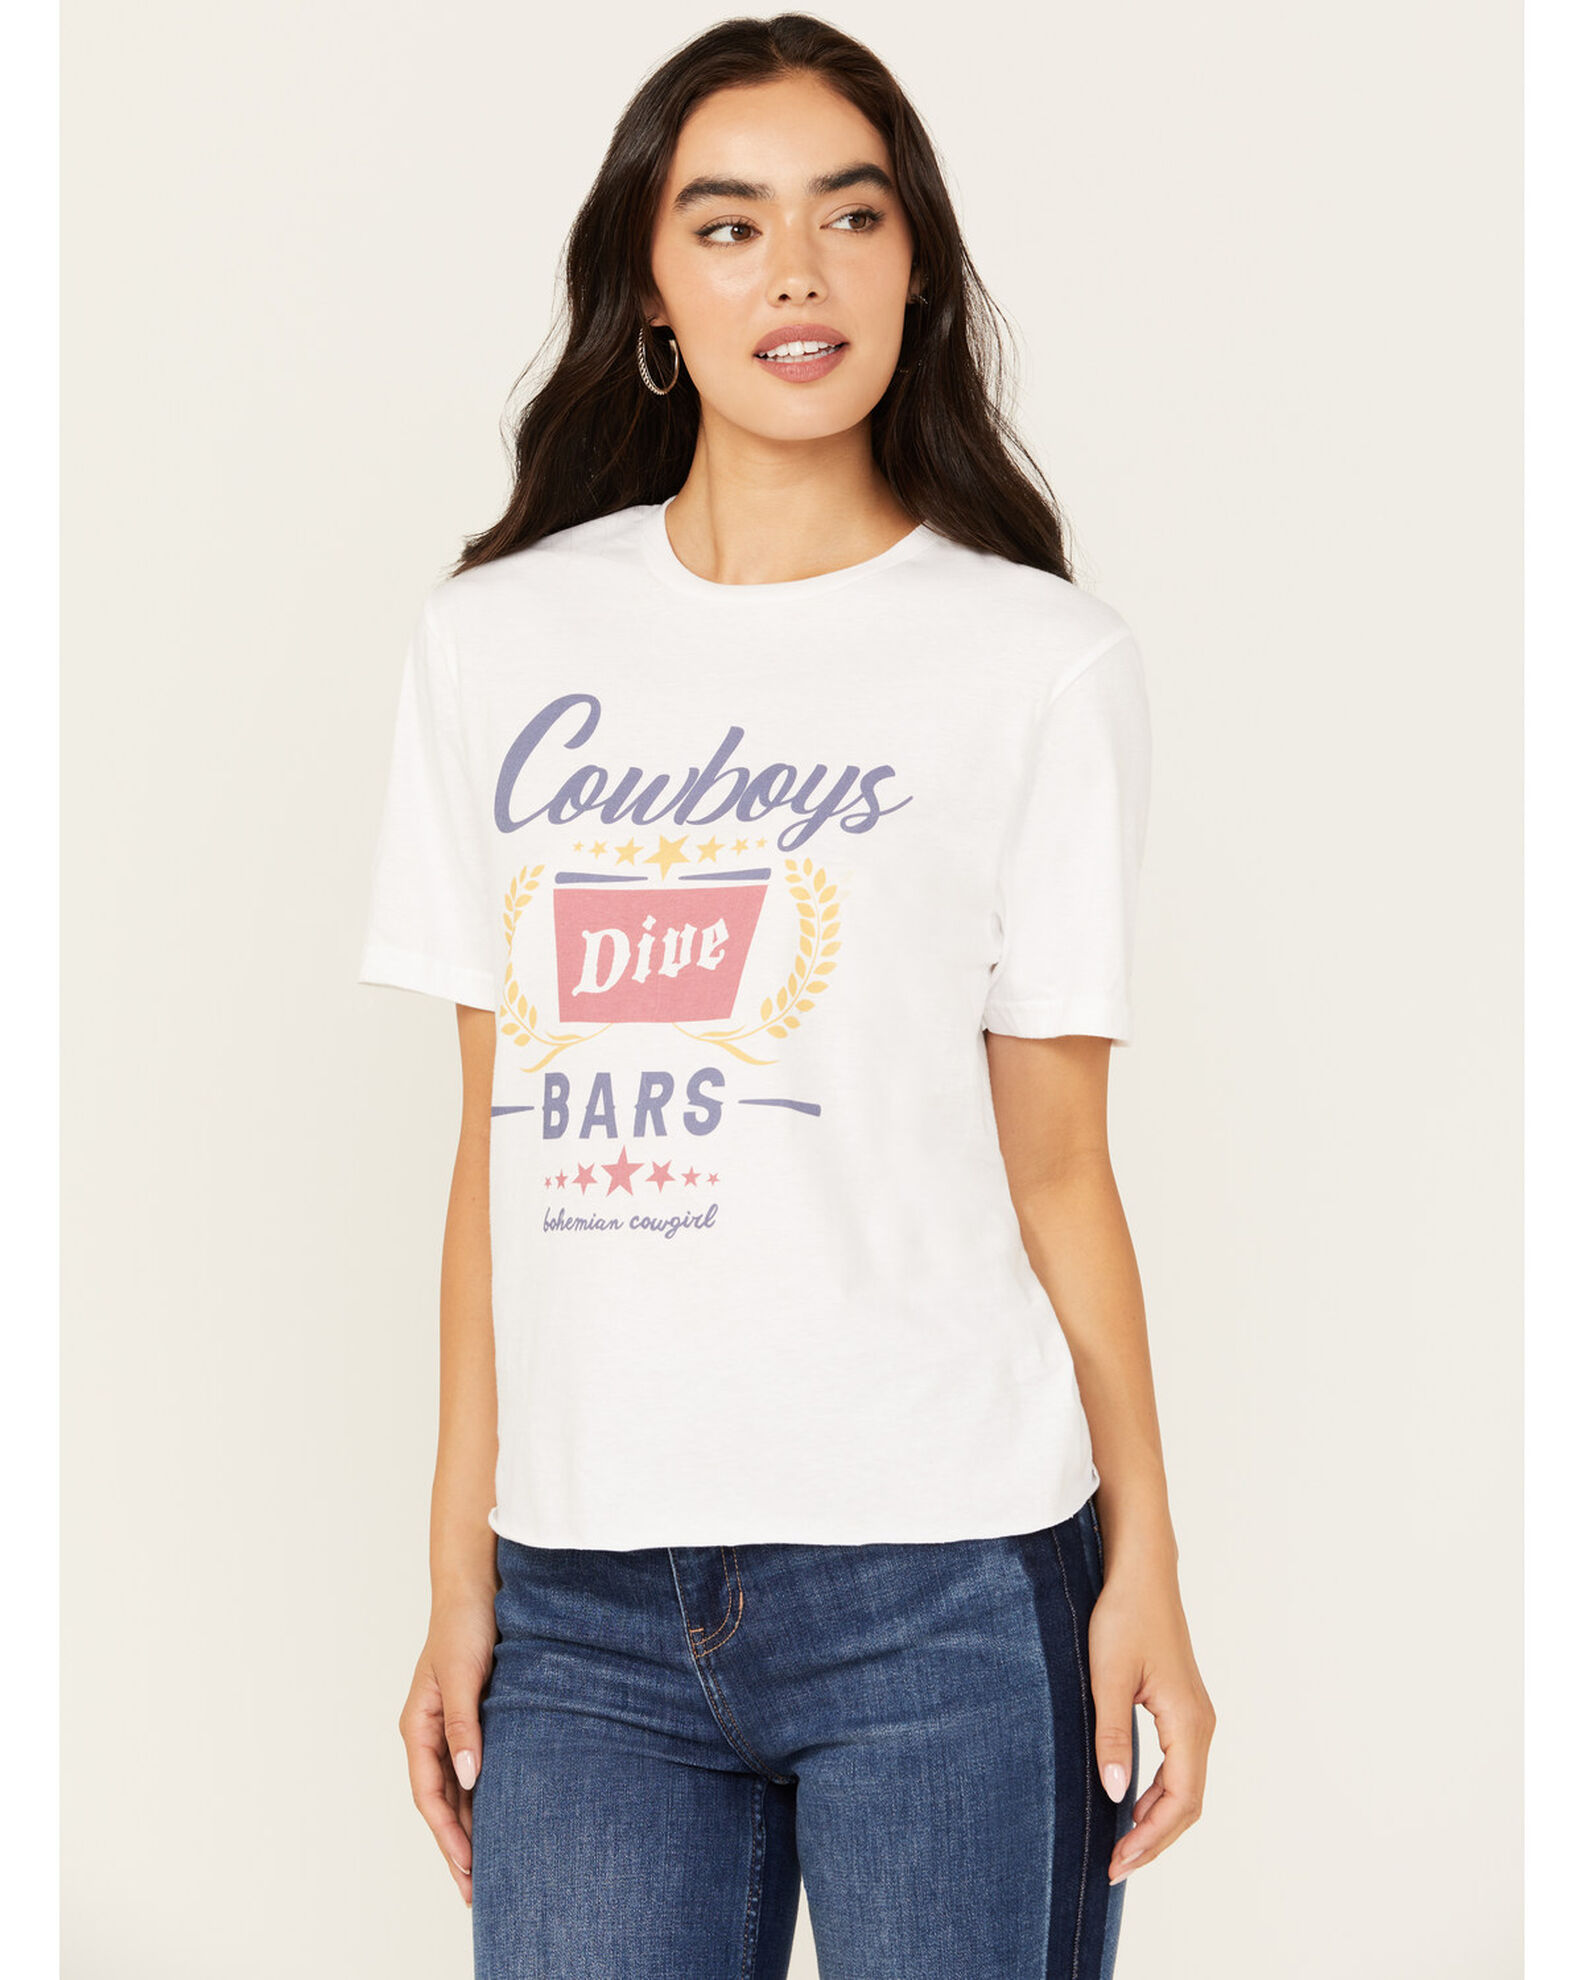 Bohemian Cowgirl Women's Cowboys & Dive Bars Short Sleeve Cropped Graphic Tee